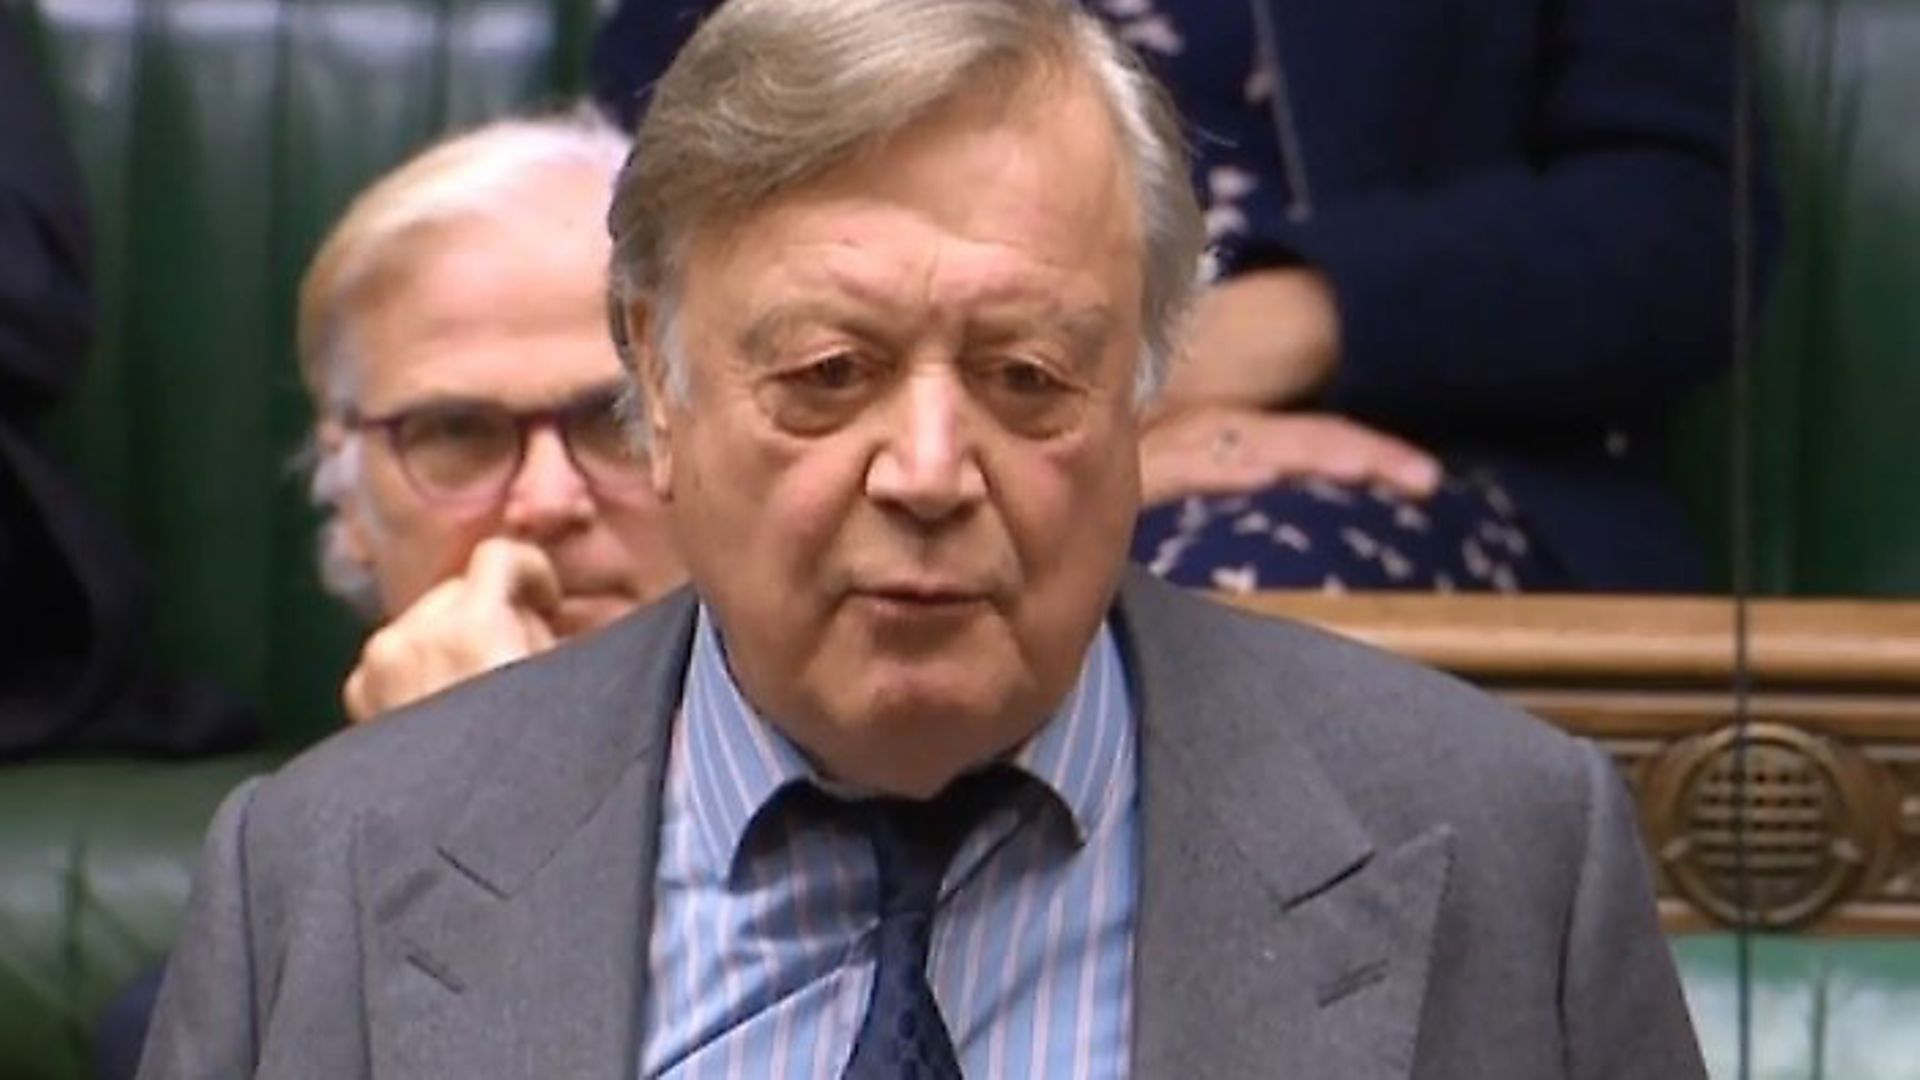 Ken Clarke in the House of Commons. Photograph: Parliament TV. - Credit: Archant